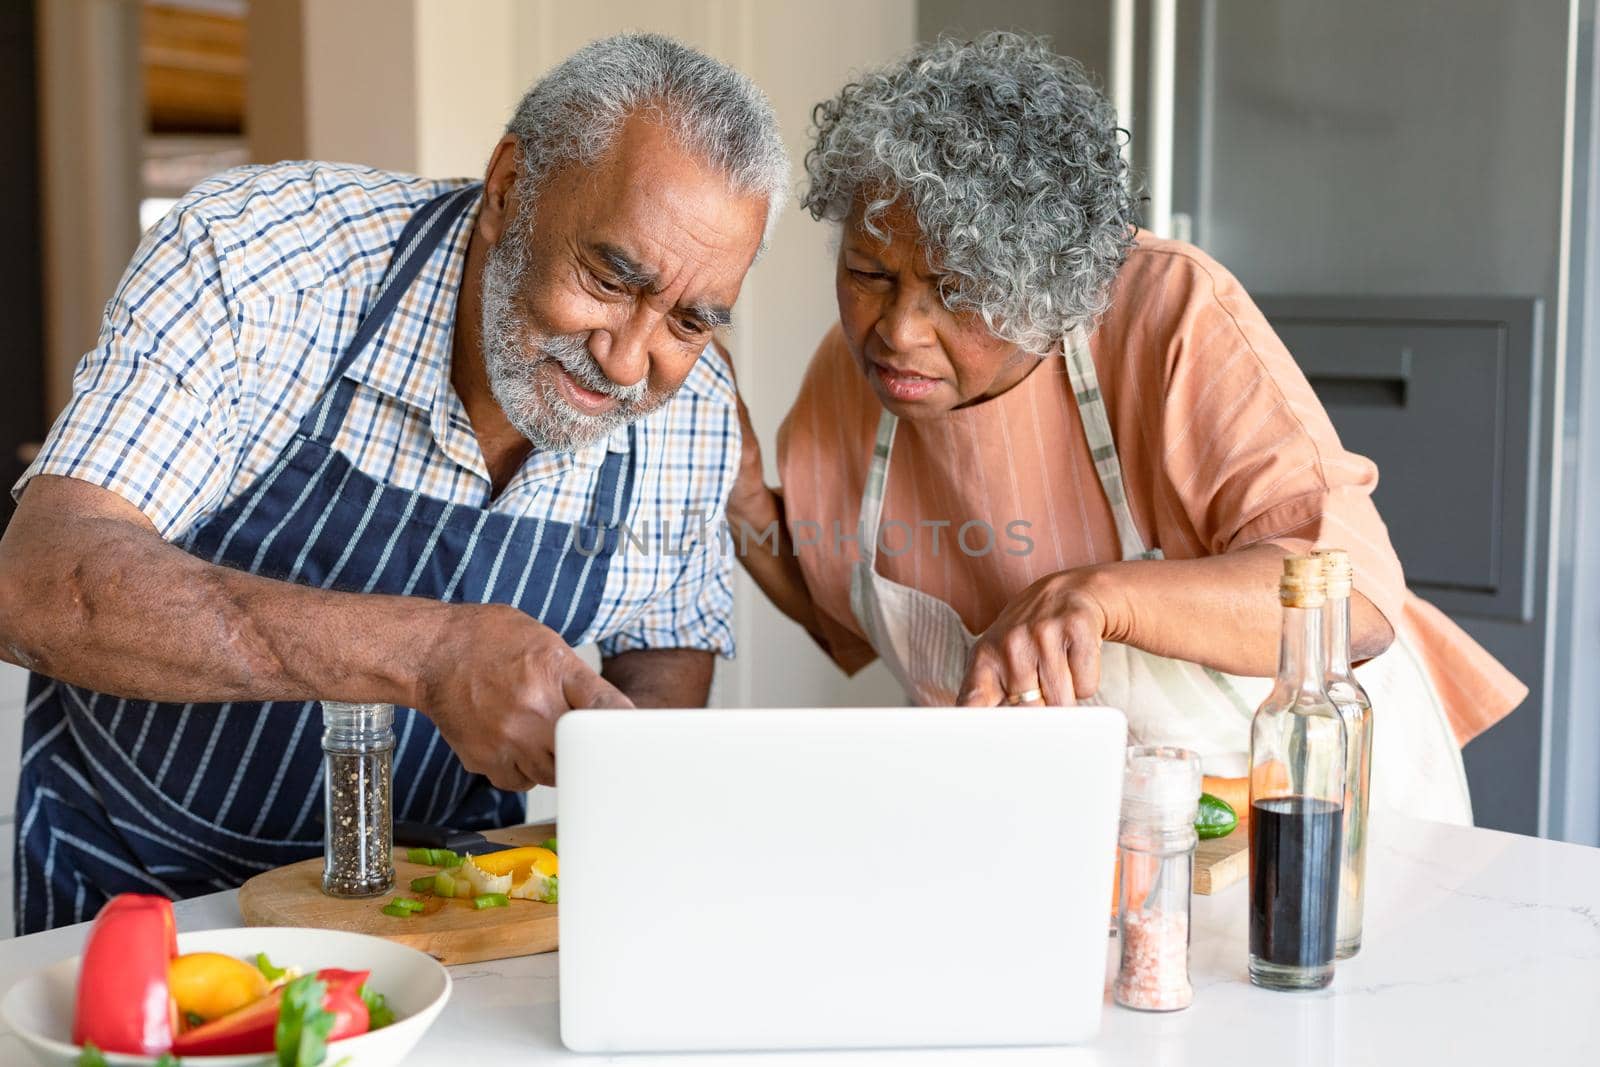 Happy arfican american senior couple preparing meal together and using laptop. healthy retirement lifestyle at home.